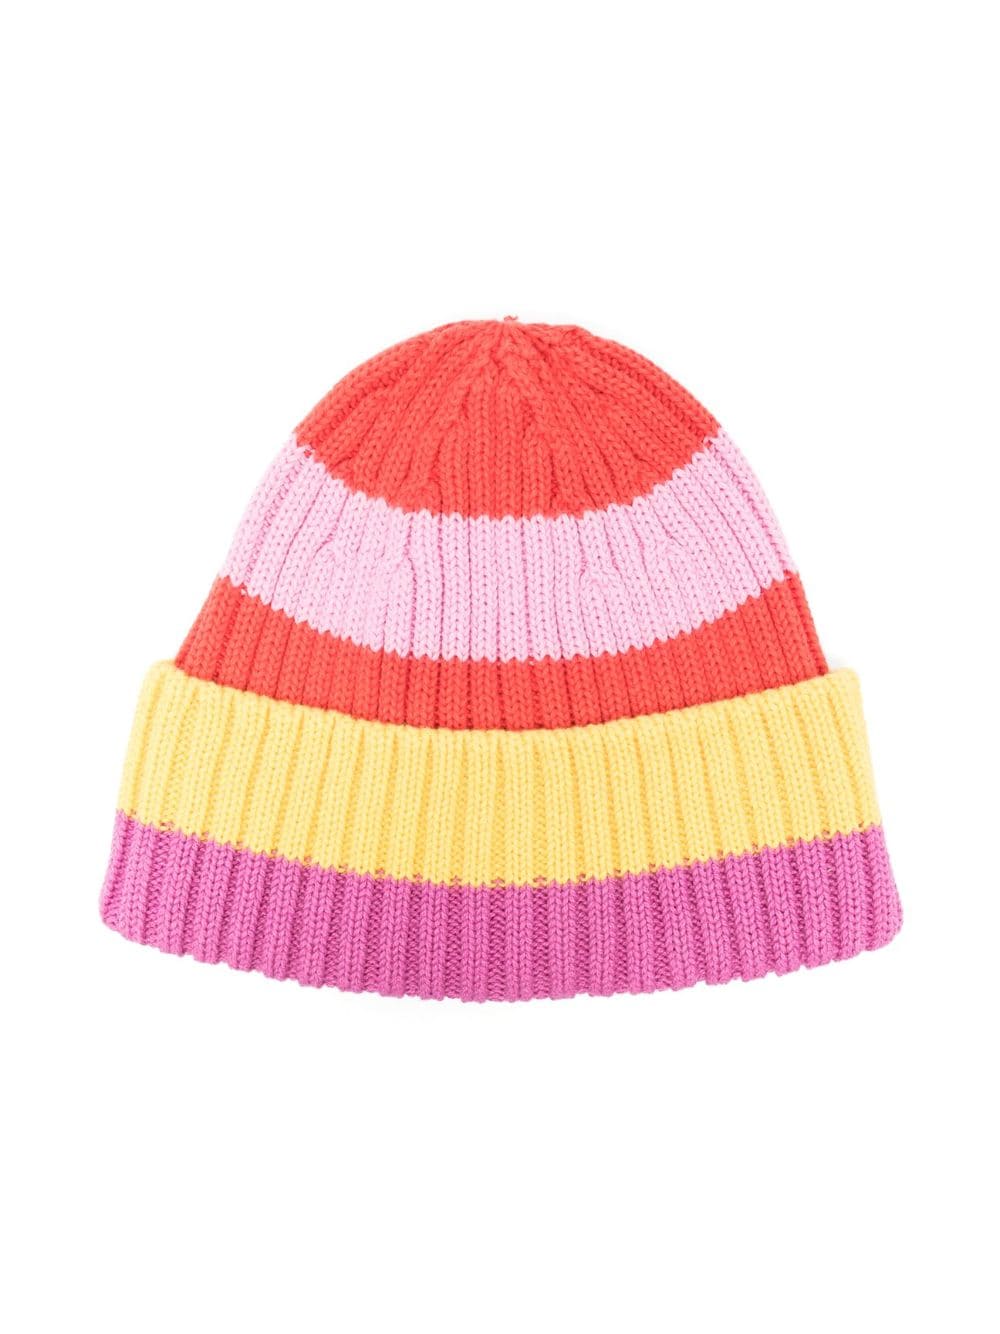 Multicolored hat for girls